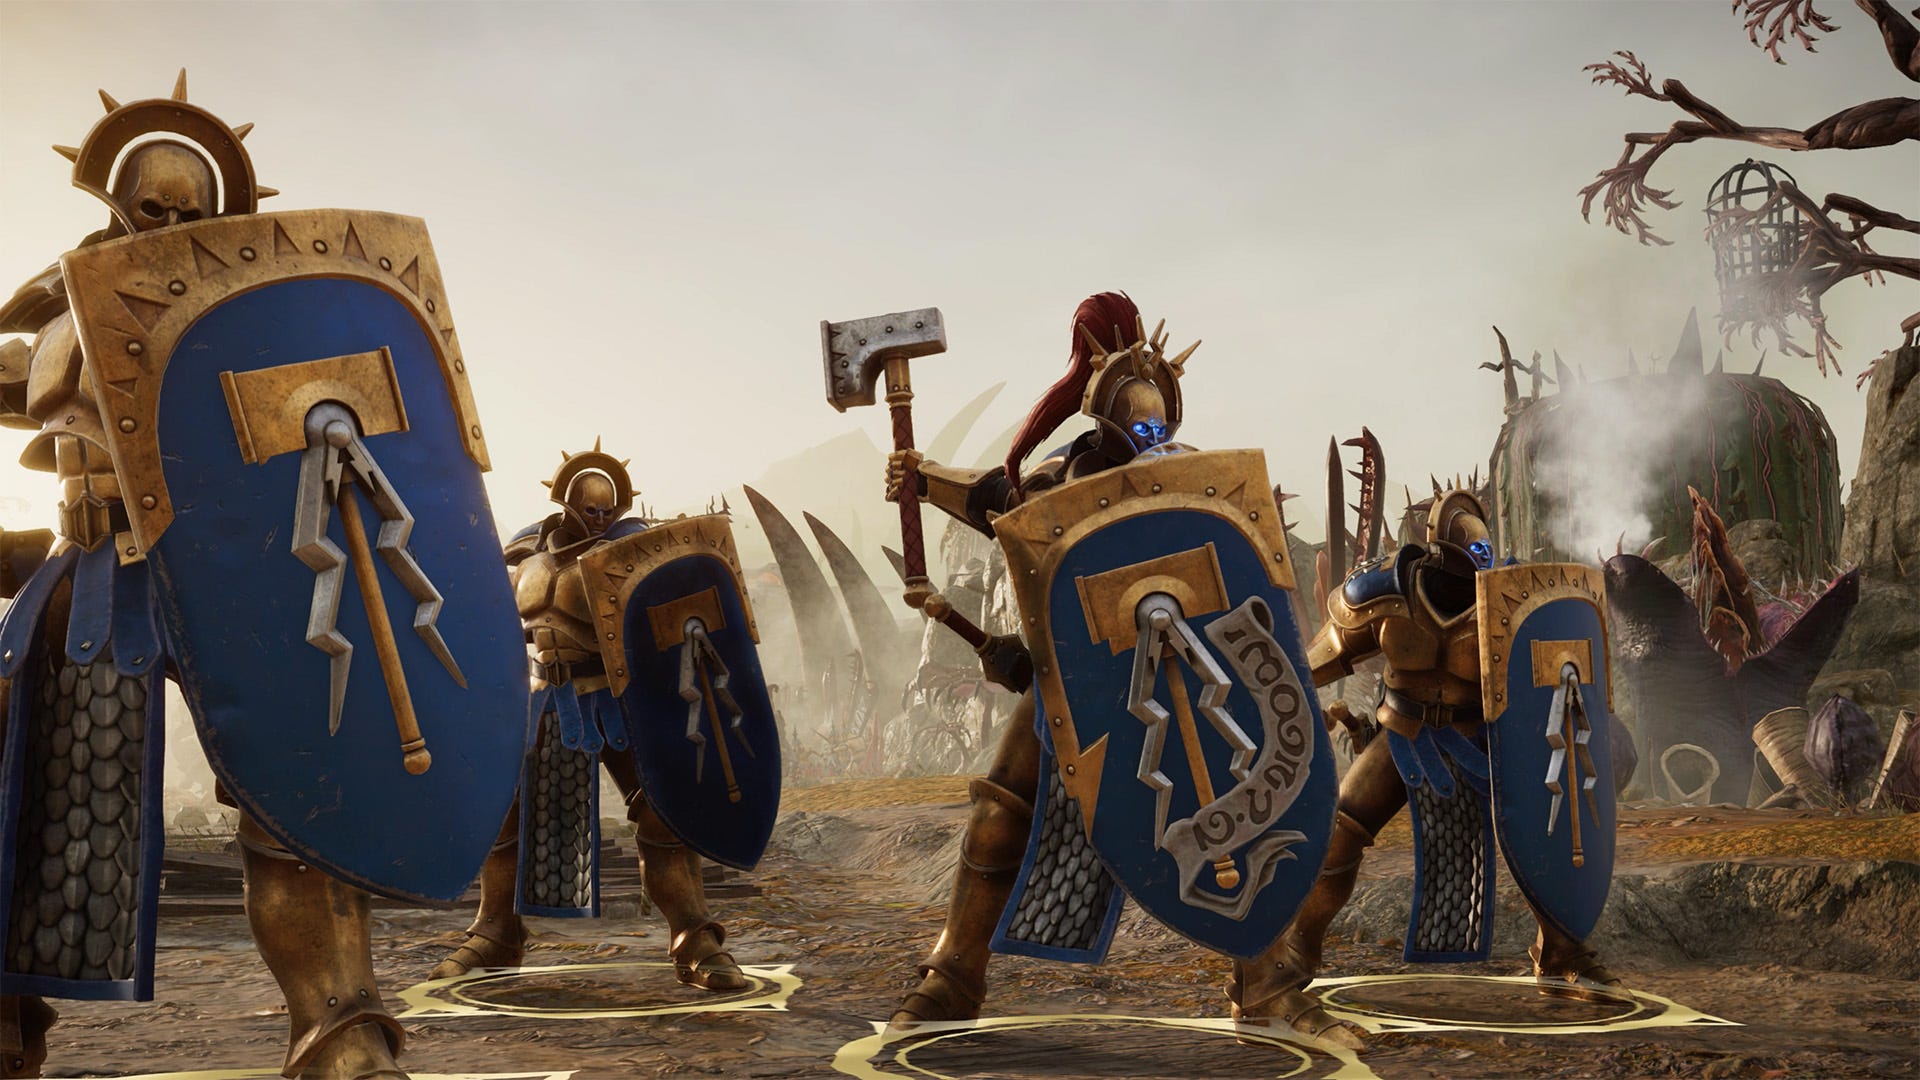 Warhammer Age Of Sigmar: Realms Of Ruin’s creative tools include map, livery and diorama editors